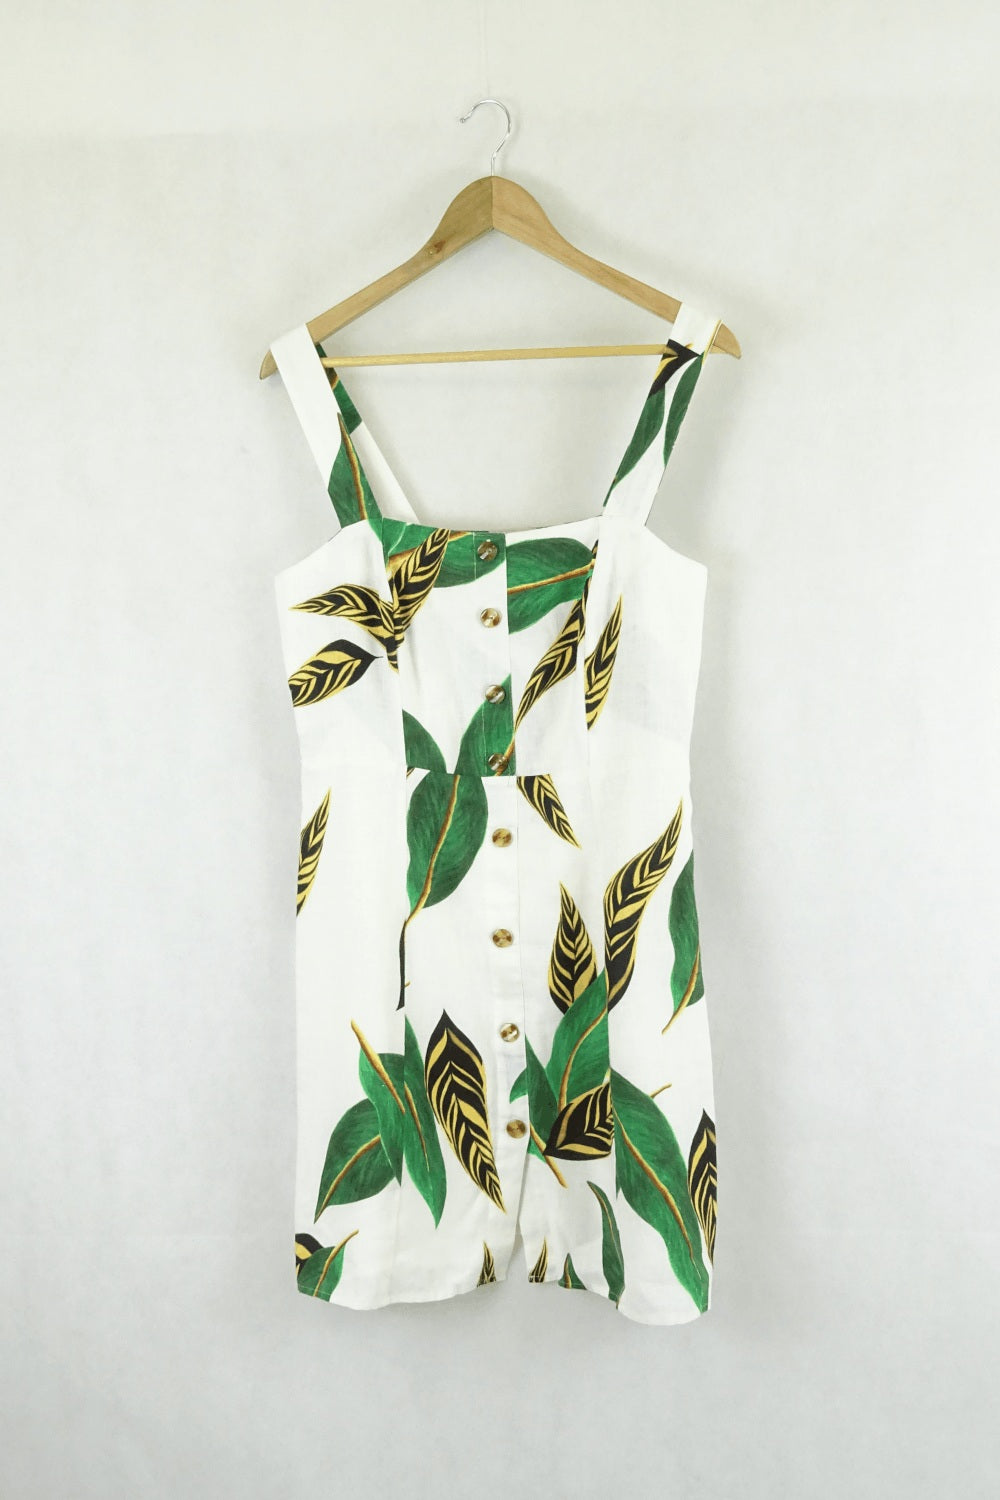 Farm Patterned Green And Yellow Dress L